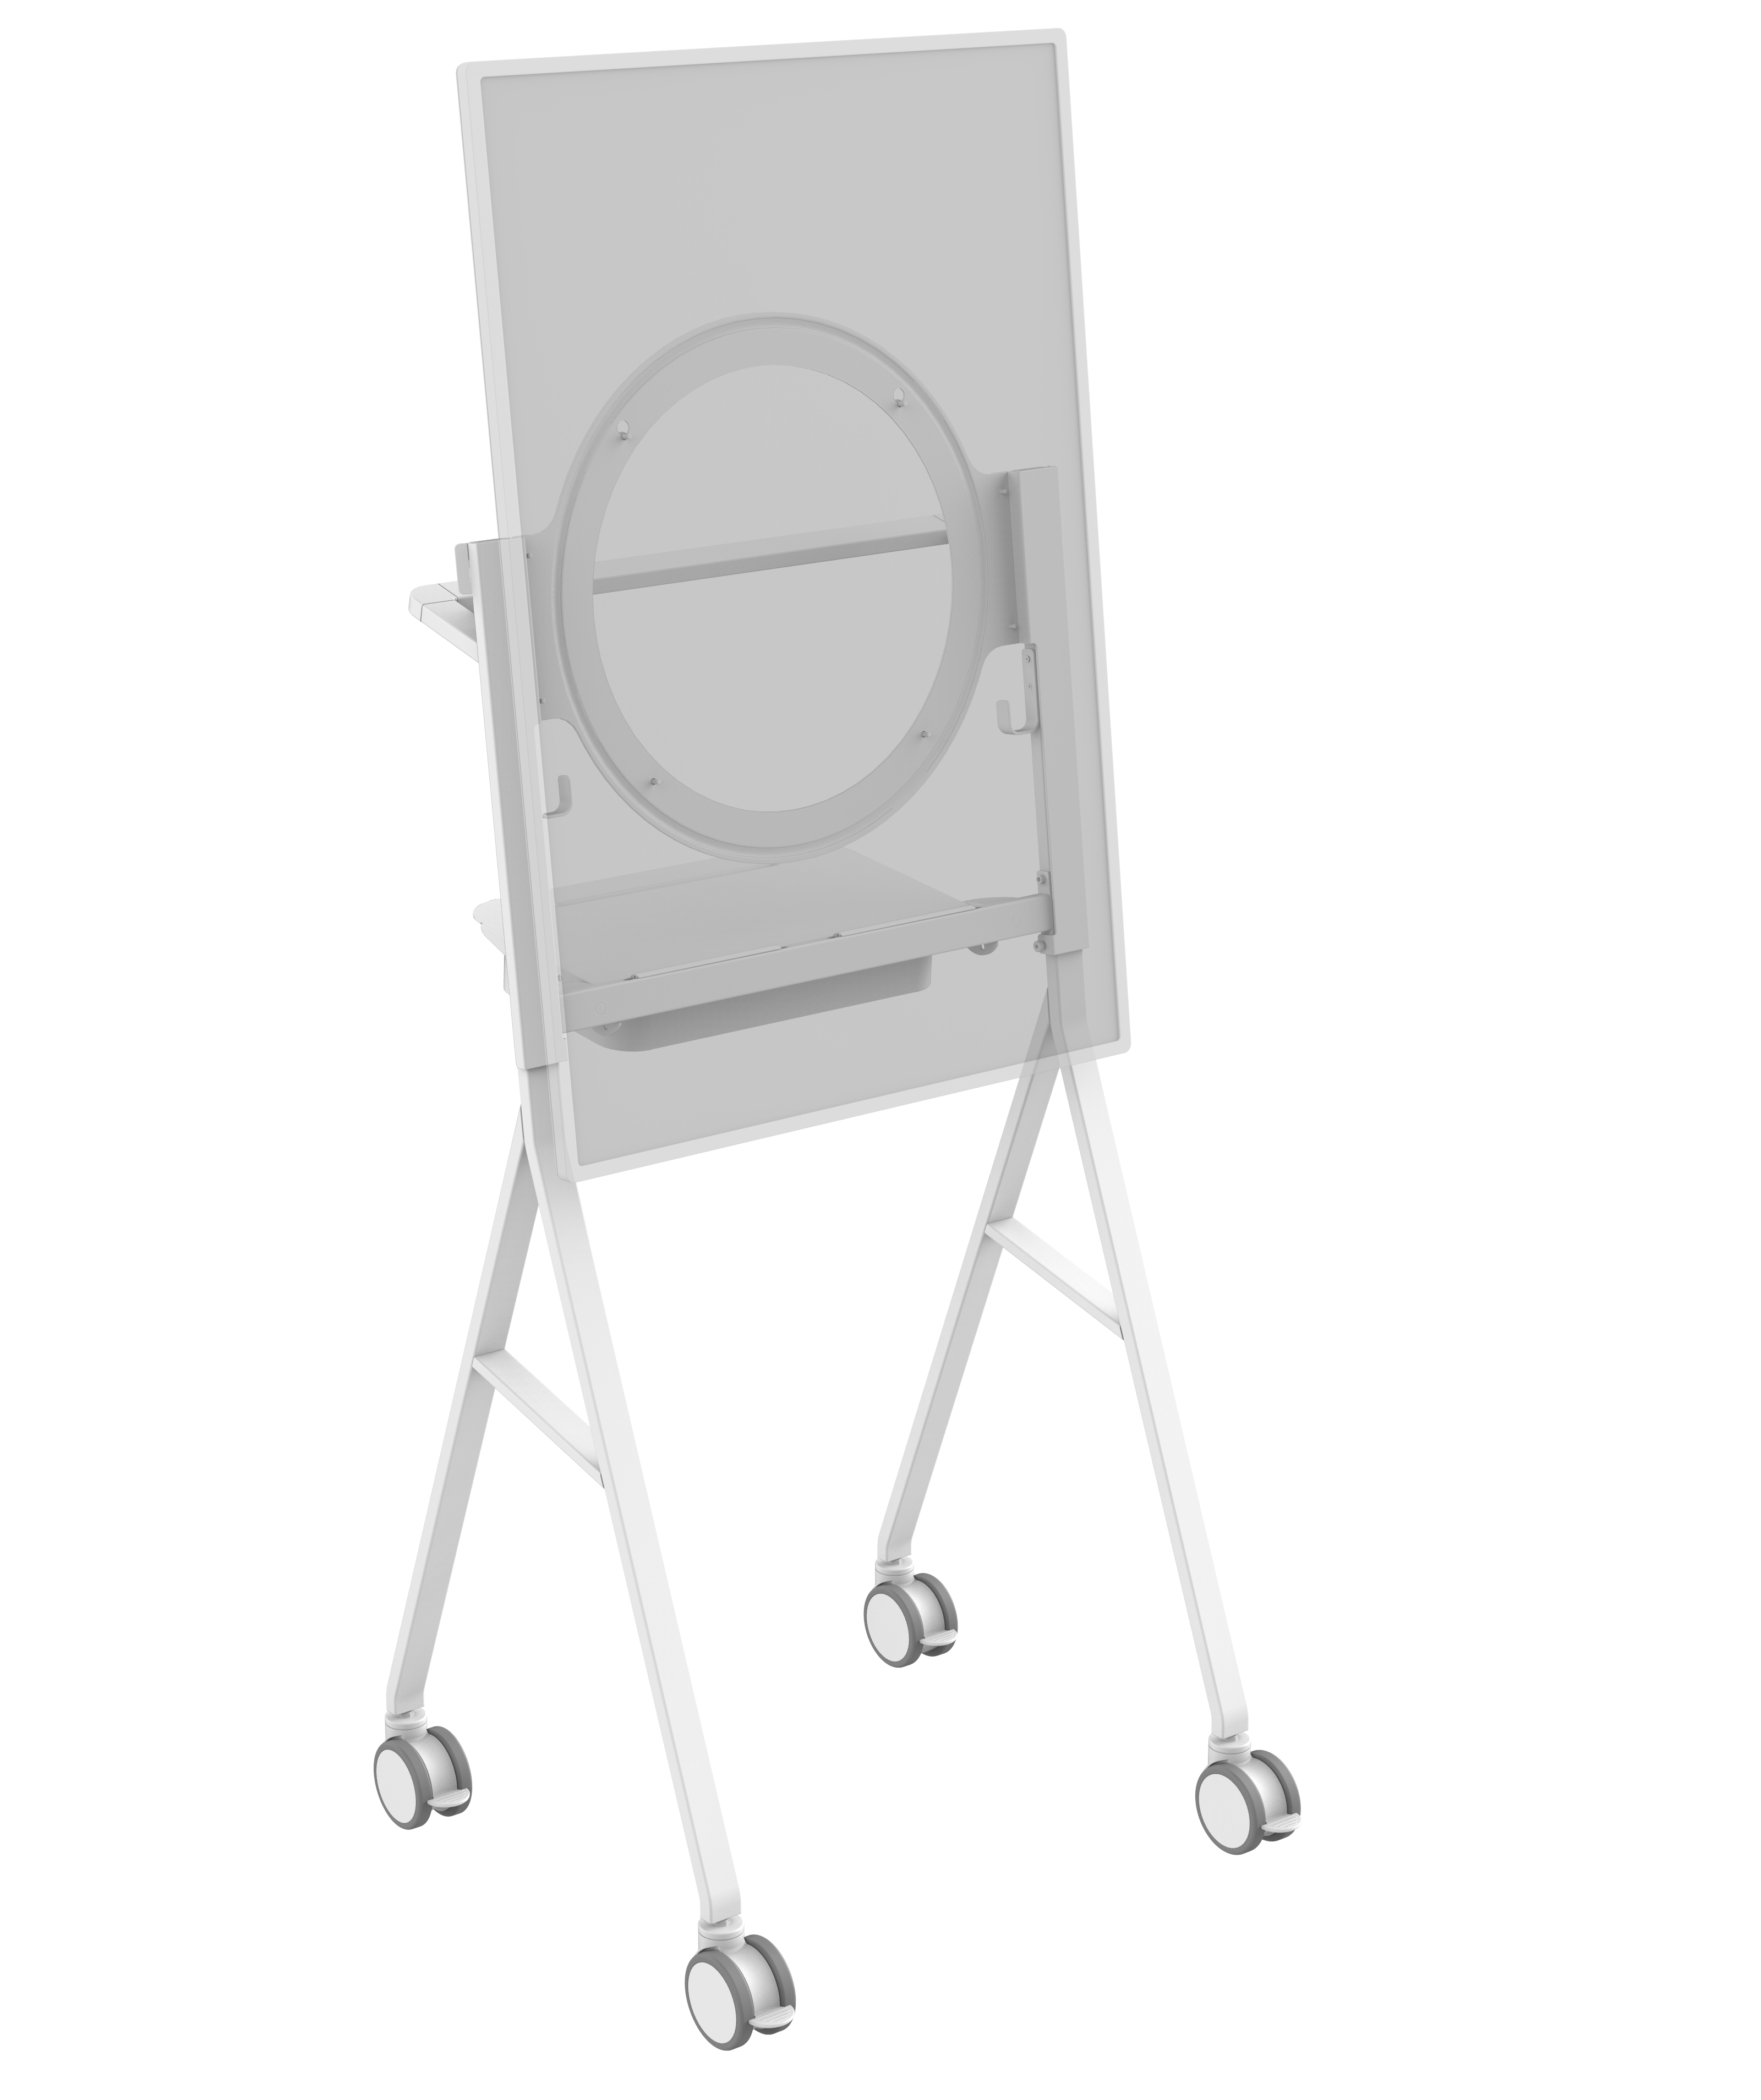 An image showing Flipchart-Style Stand for 50" Surface Hub 2S and 3